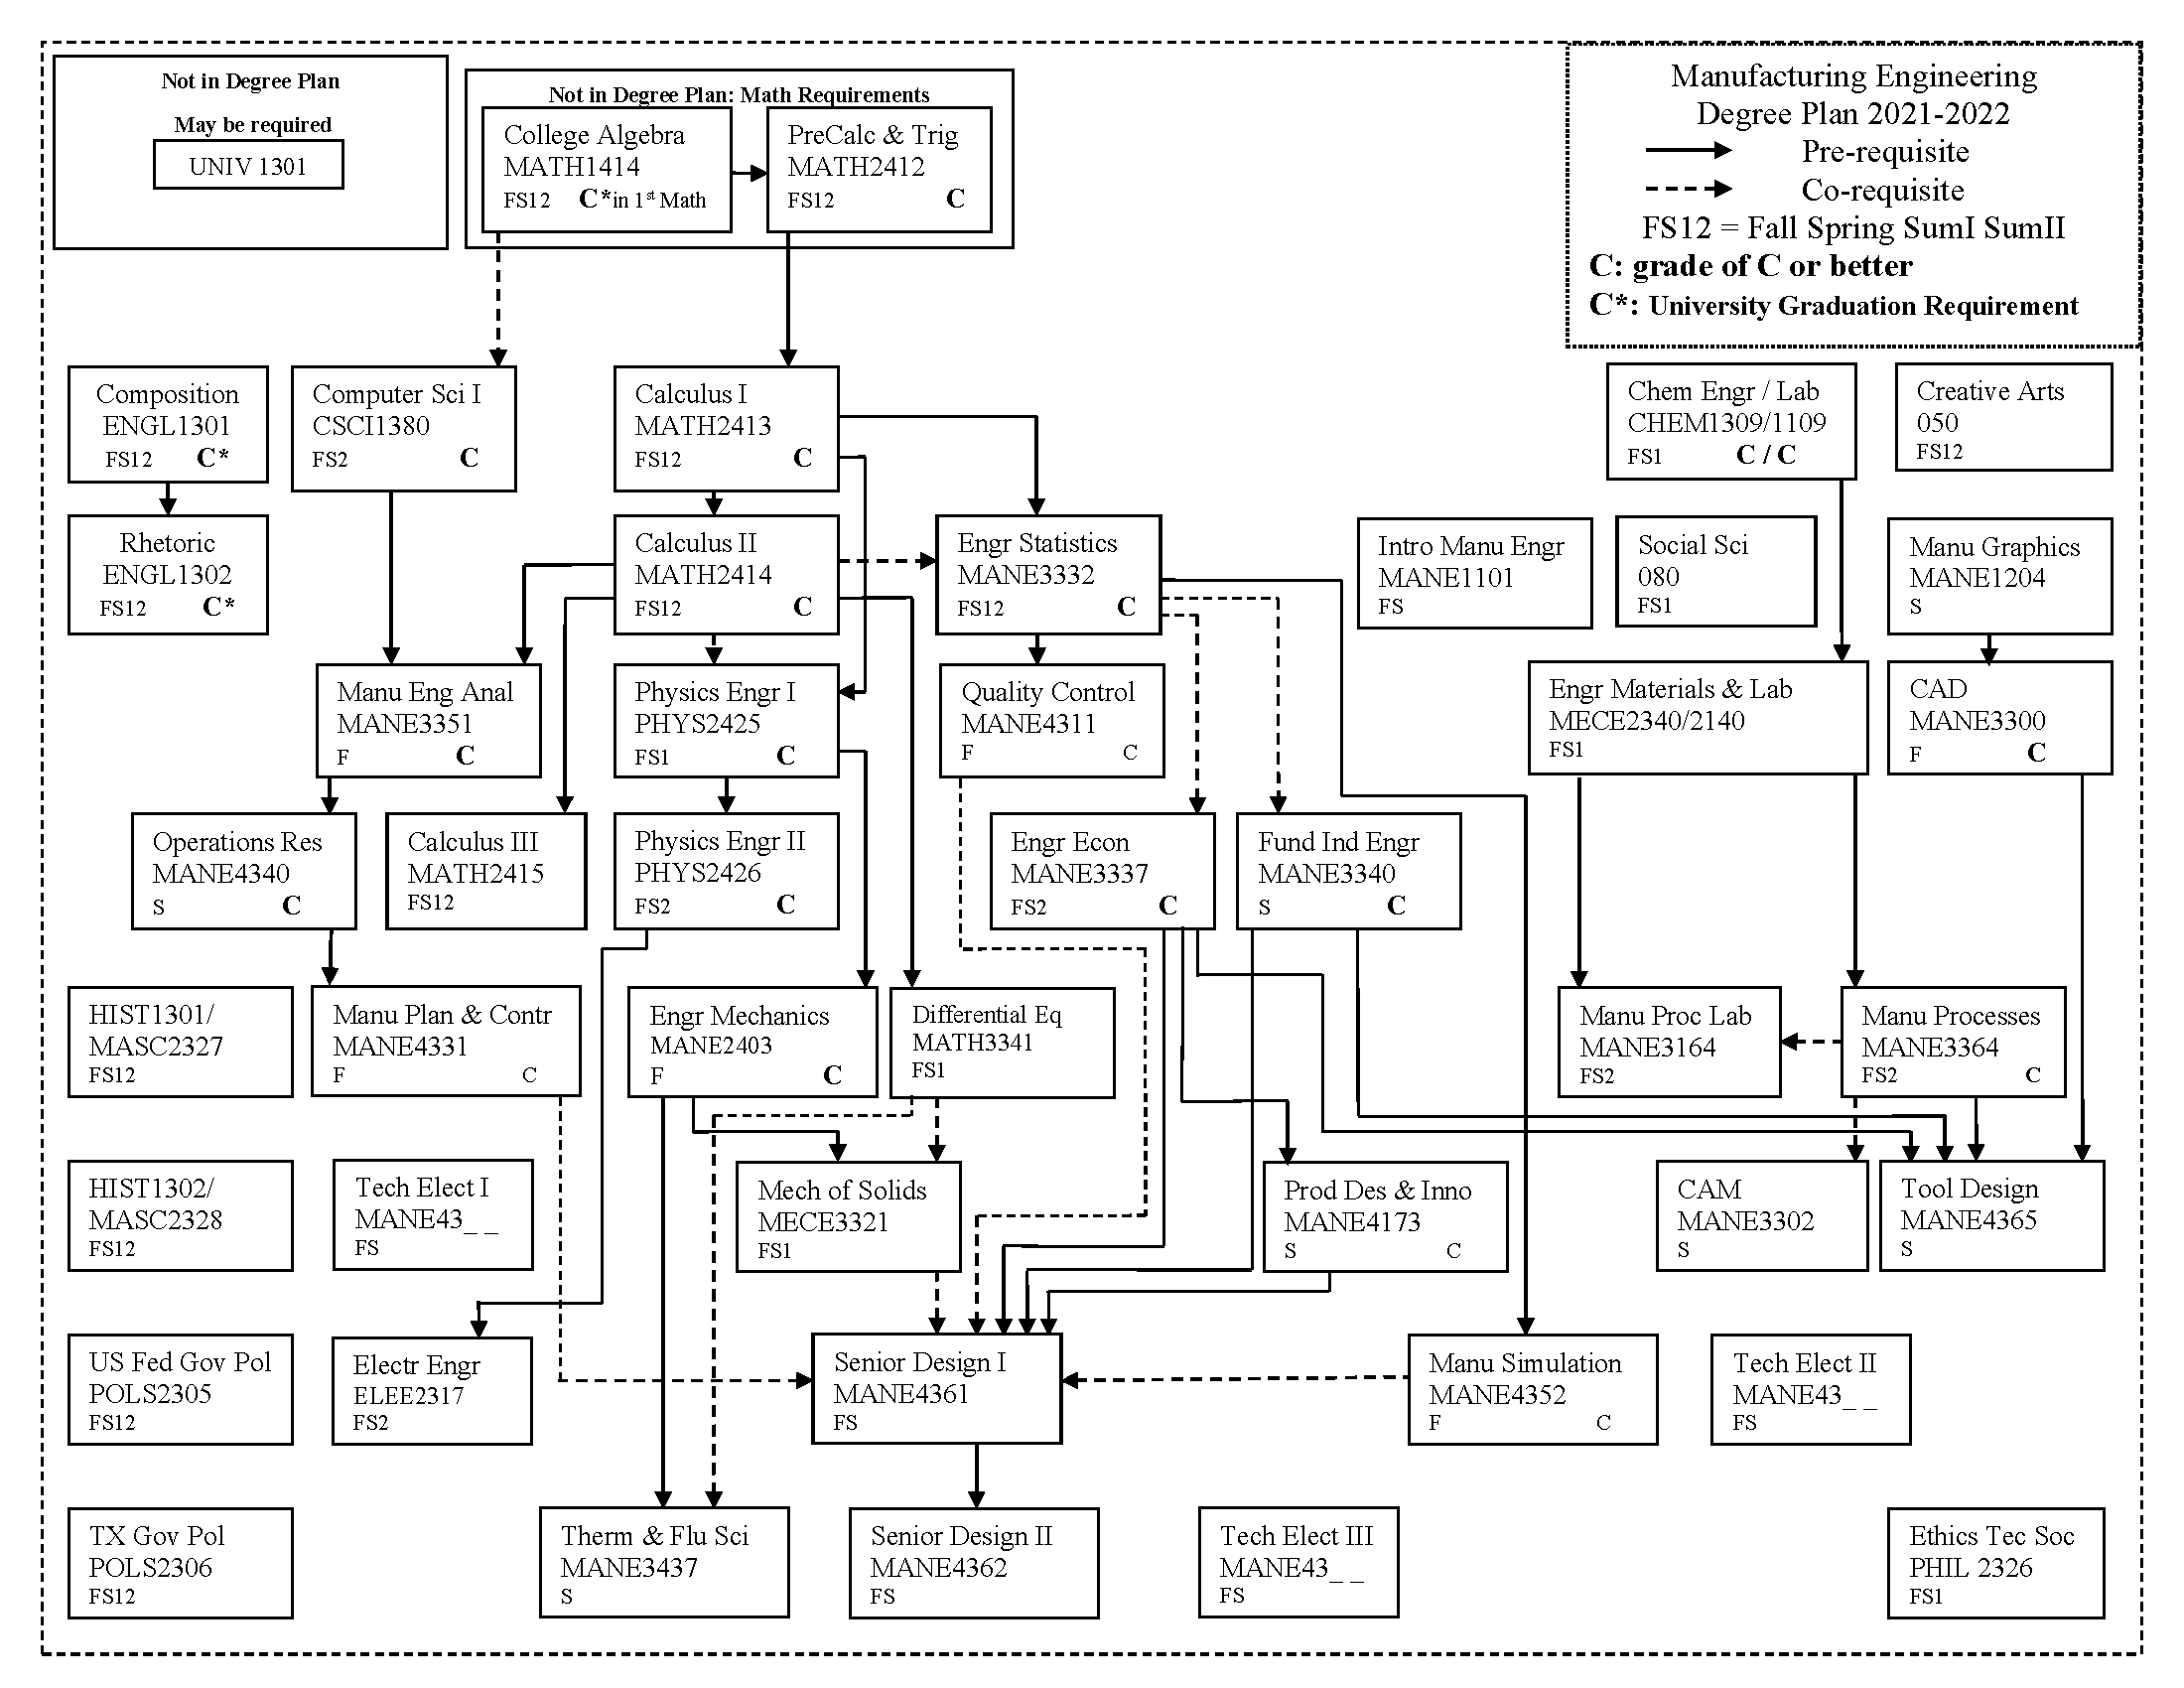 BS Manufacturing Engineering Flow Chart